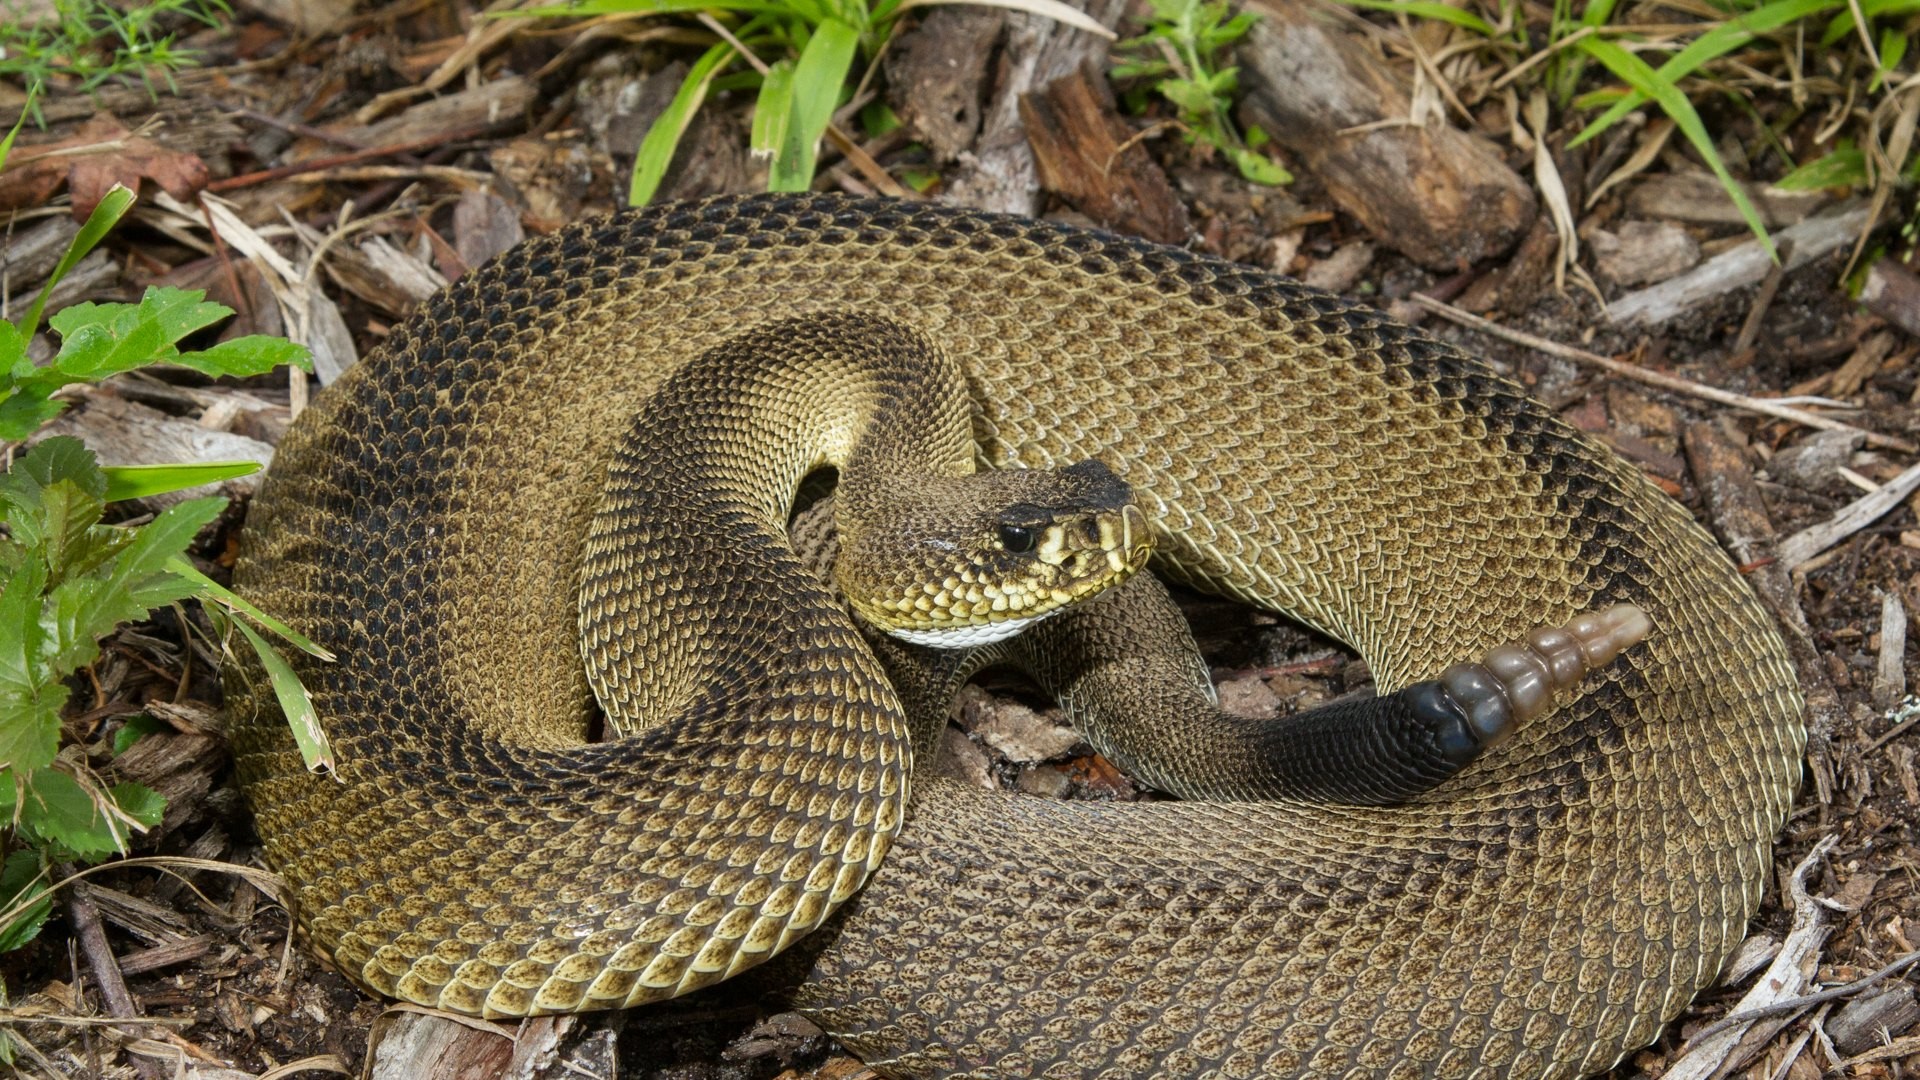 Thinking about going on a hike or gardening? April is the beginning of peak snake bite season in Florida. Here's what you should know.